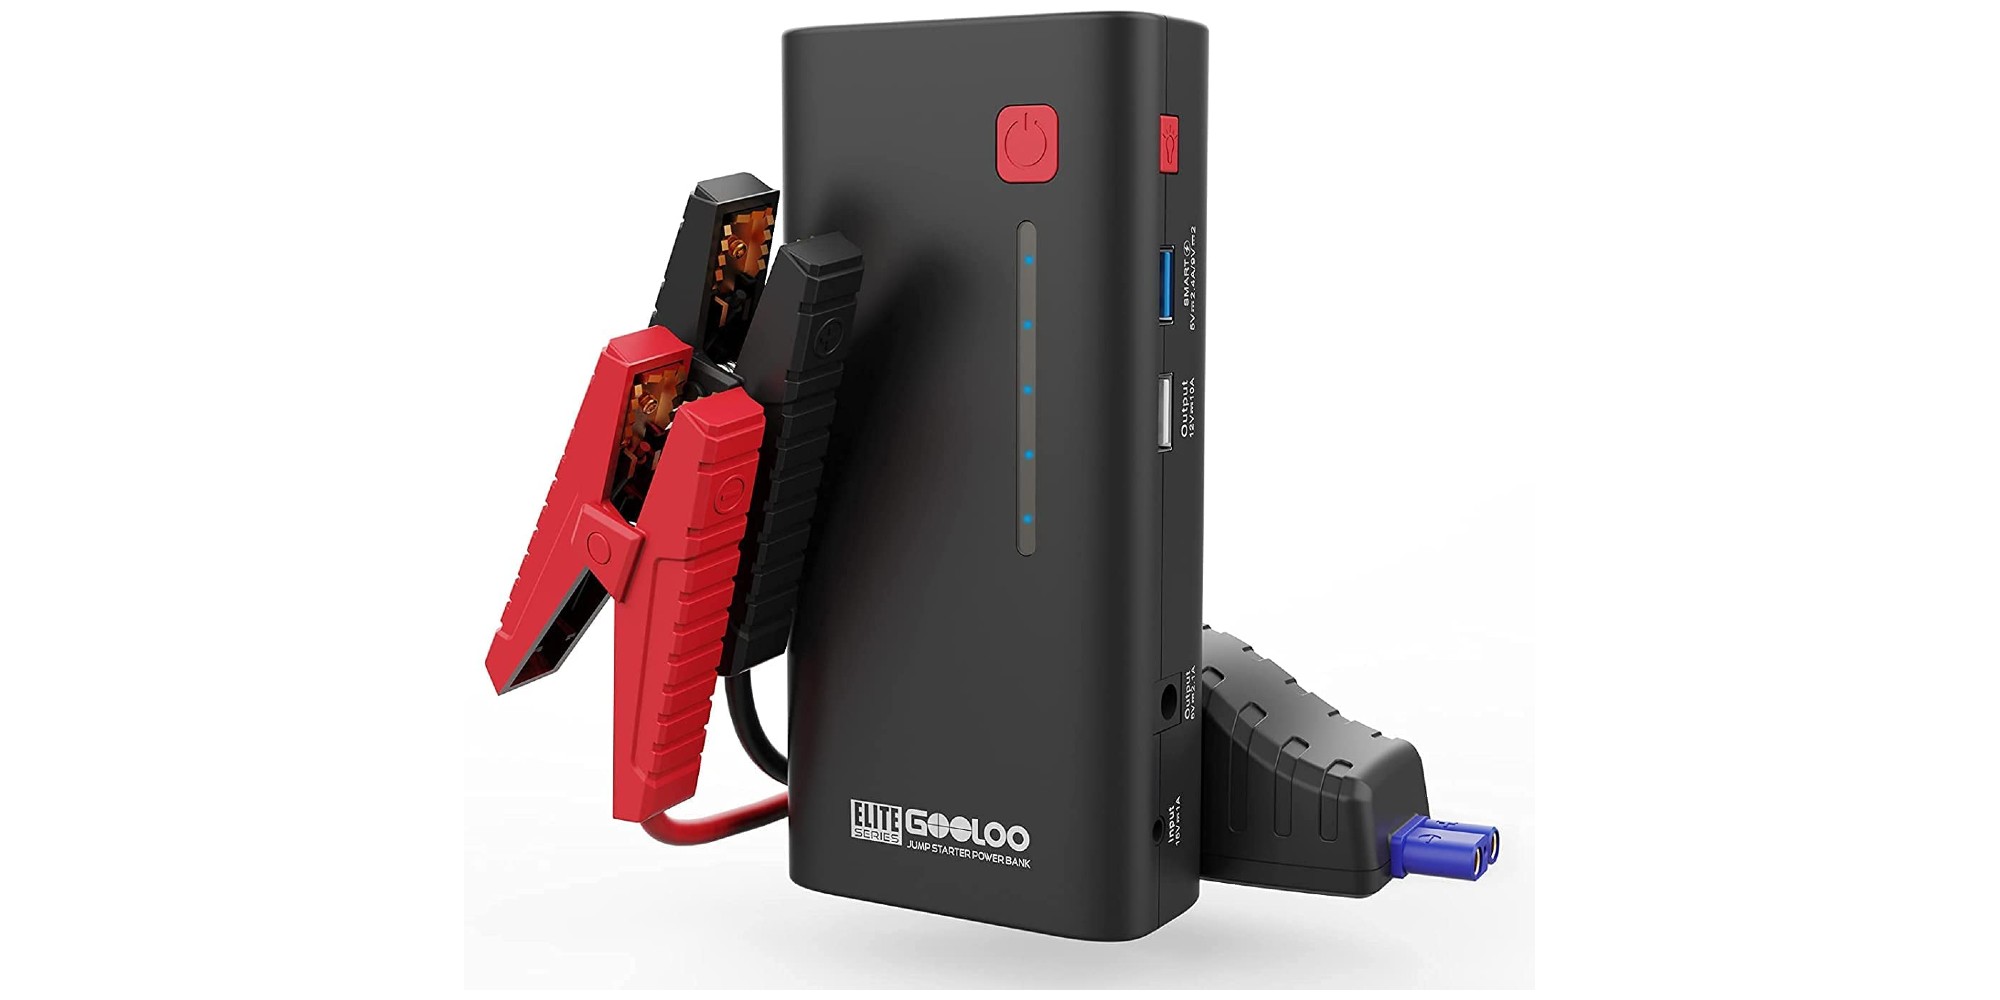 Avoid disaster with GOOLOO's portable jump starters and more from